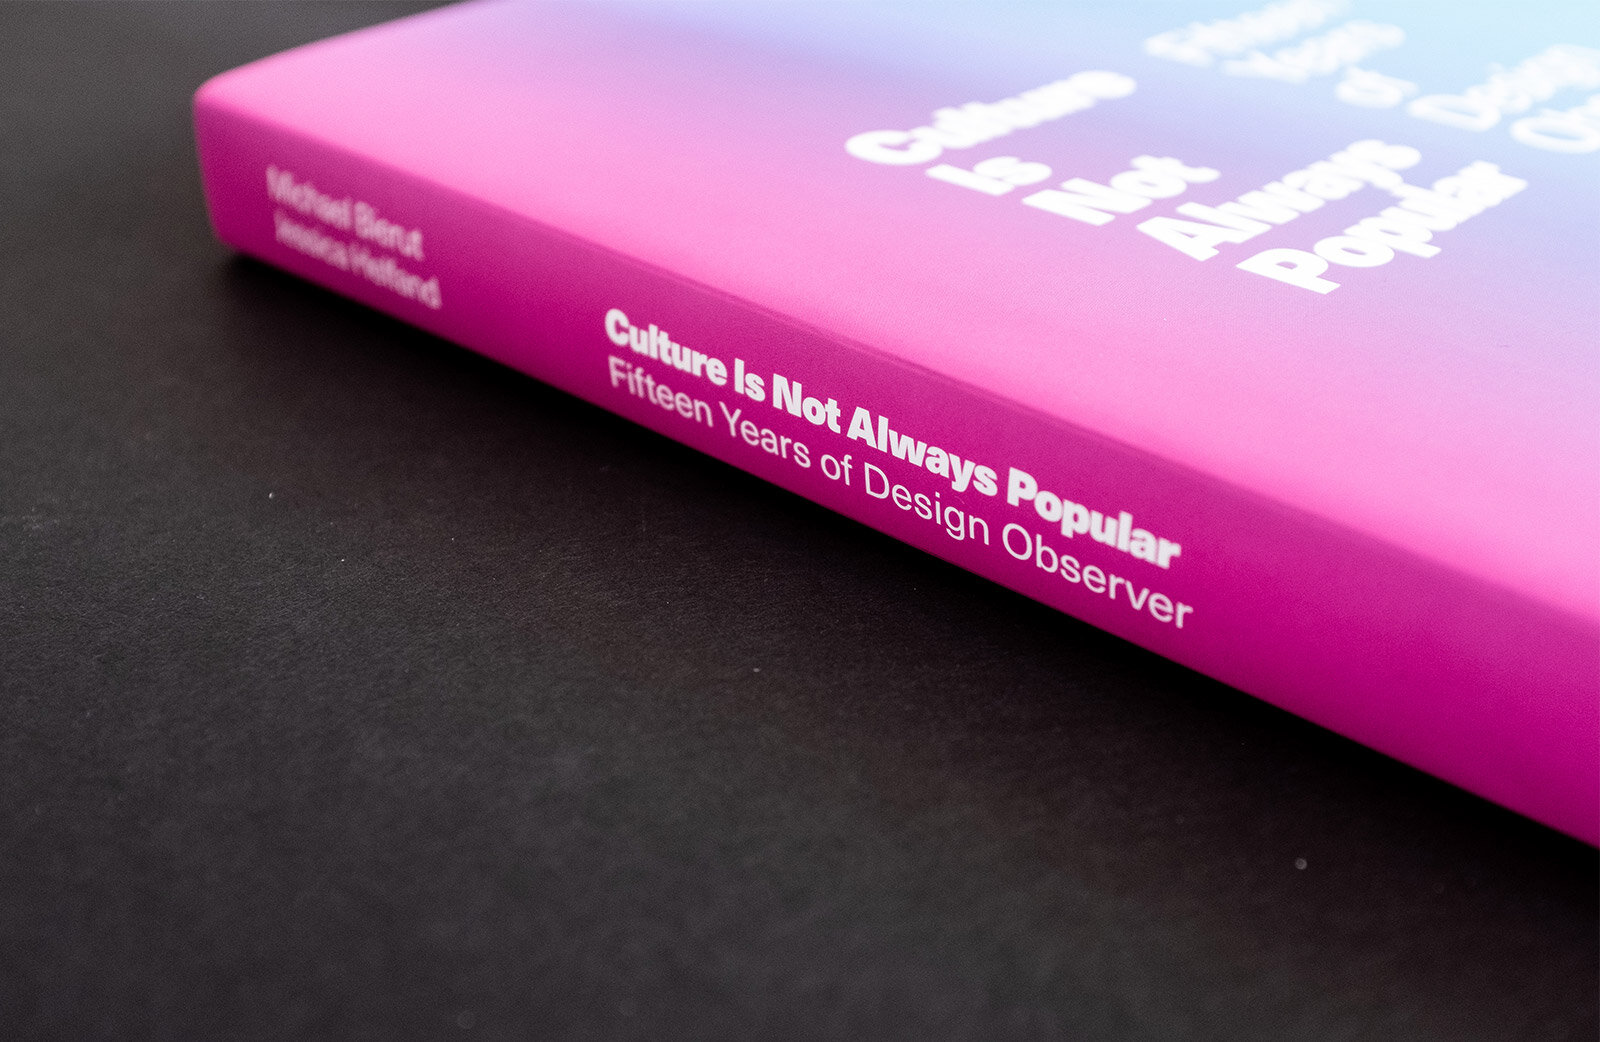 "Culture is Not Always Popular: Fifteen Years of Design Observer" Conversation and Book Signing